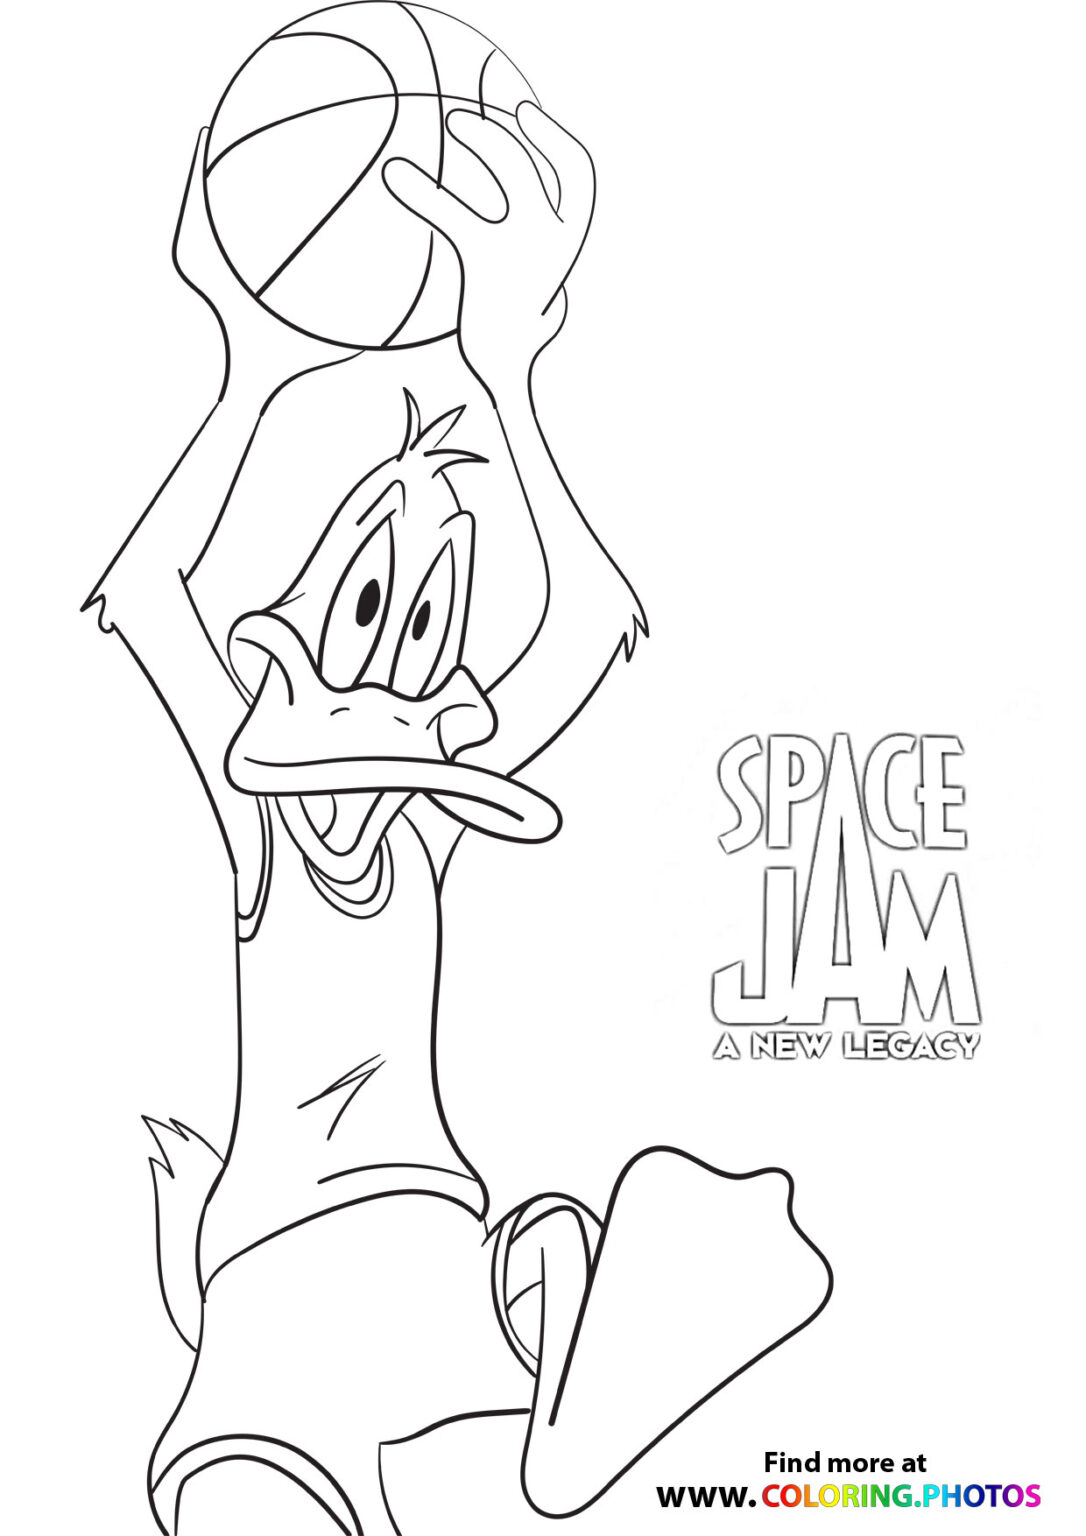 daffy-duck-playing-basketball-space-jam-a-new-legacy-coloring